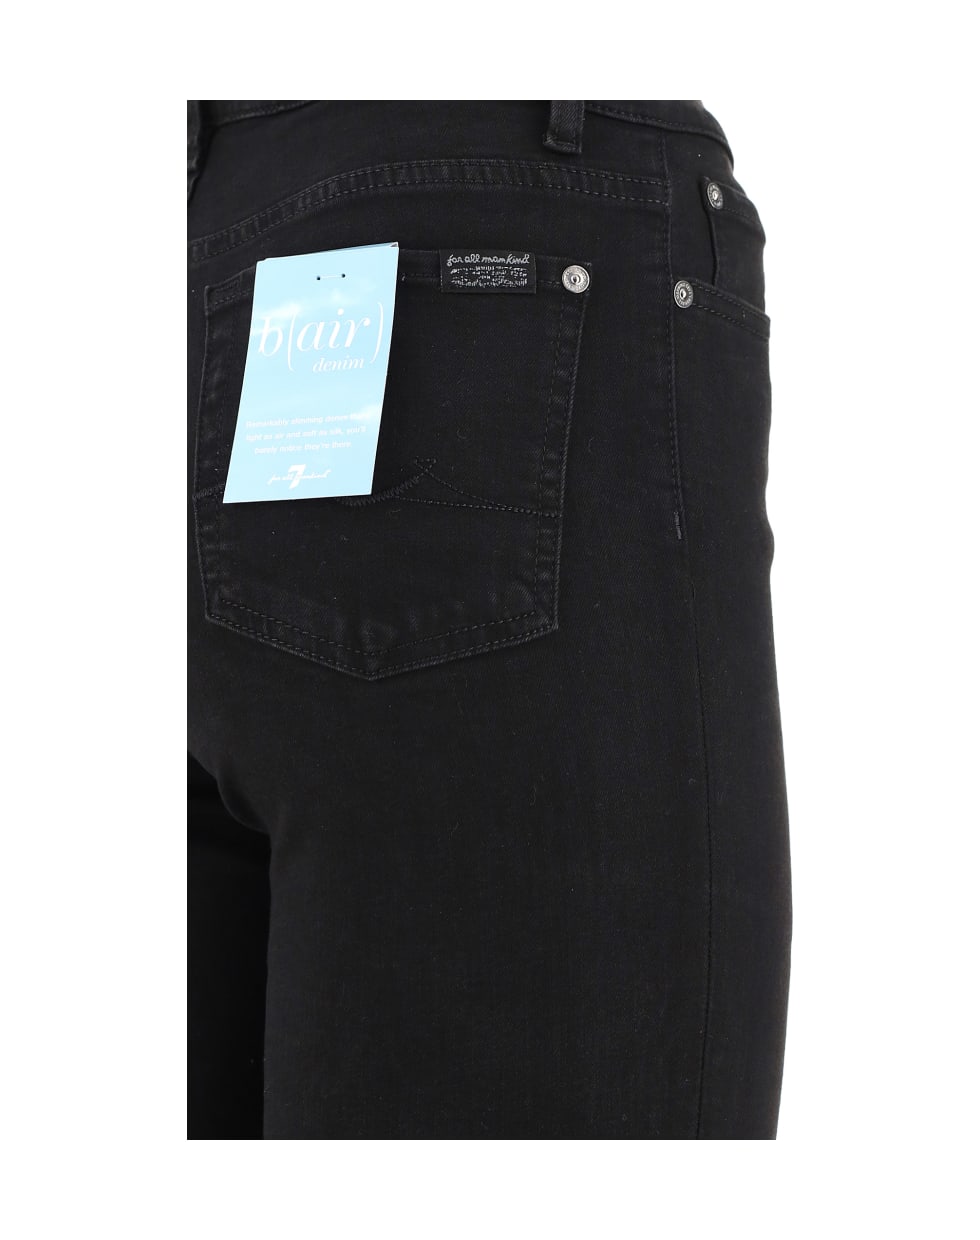 7 For All Mankind 7forallmankind Bair Jeans - Black